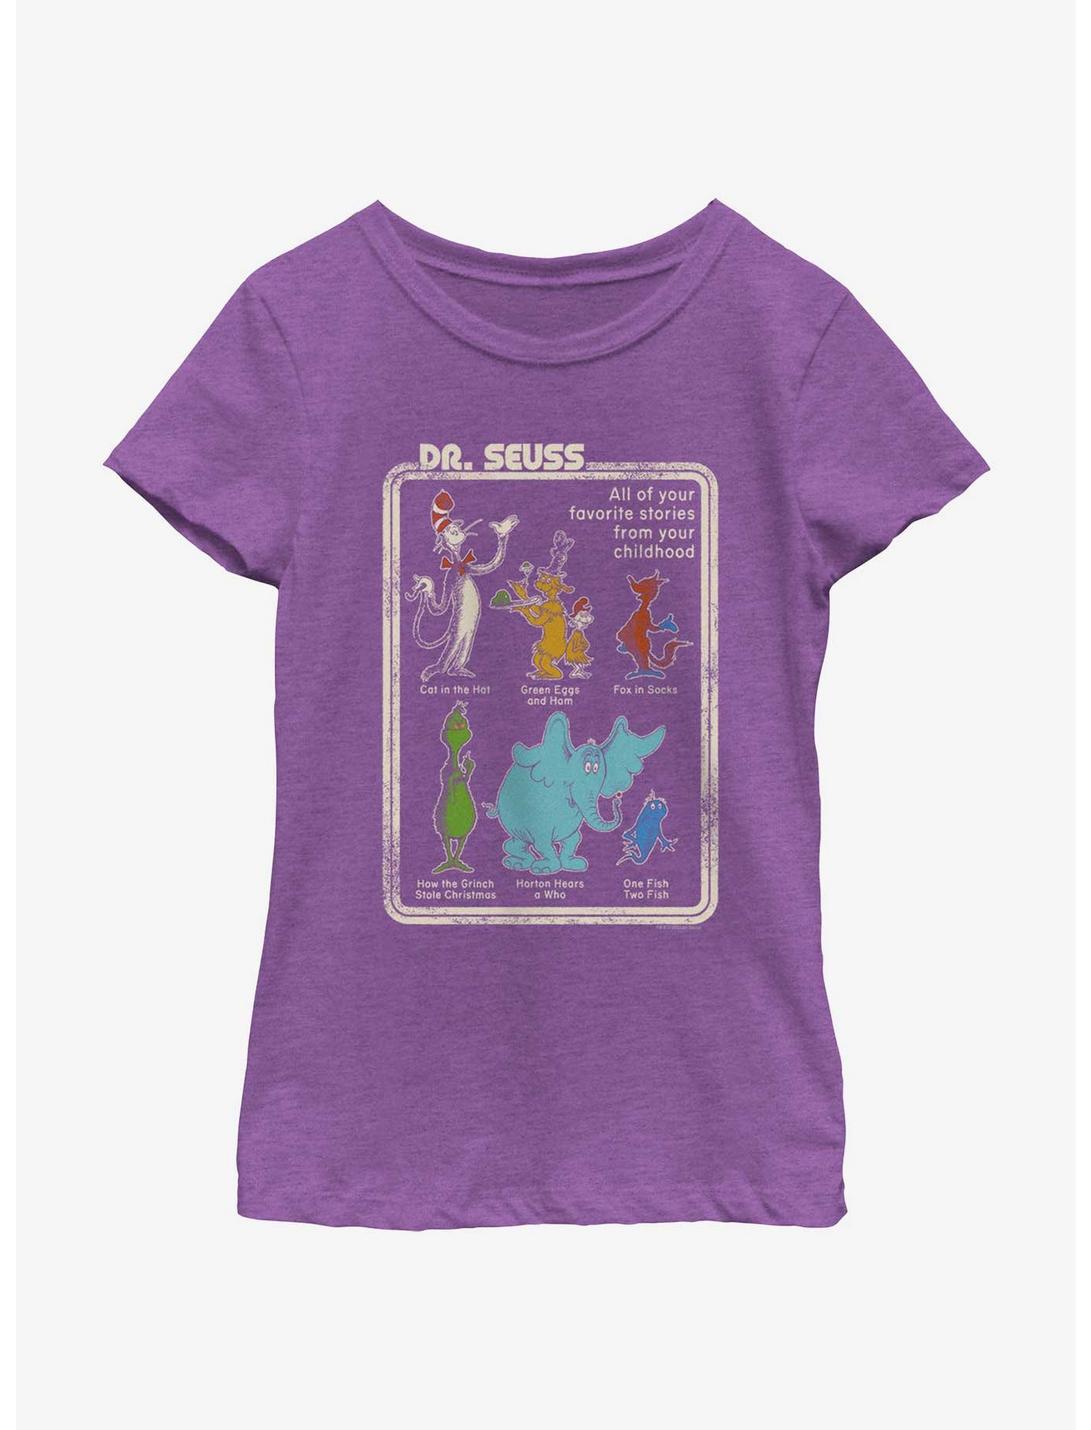 Dr. Seuss Favorite Stories From Childhood Youth Girls T-Shirt, PURPLE BERRY, hi-res